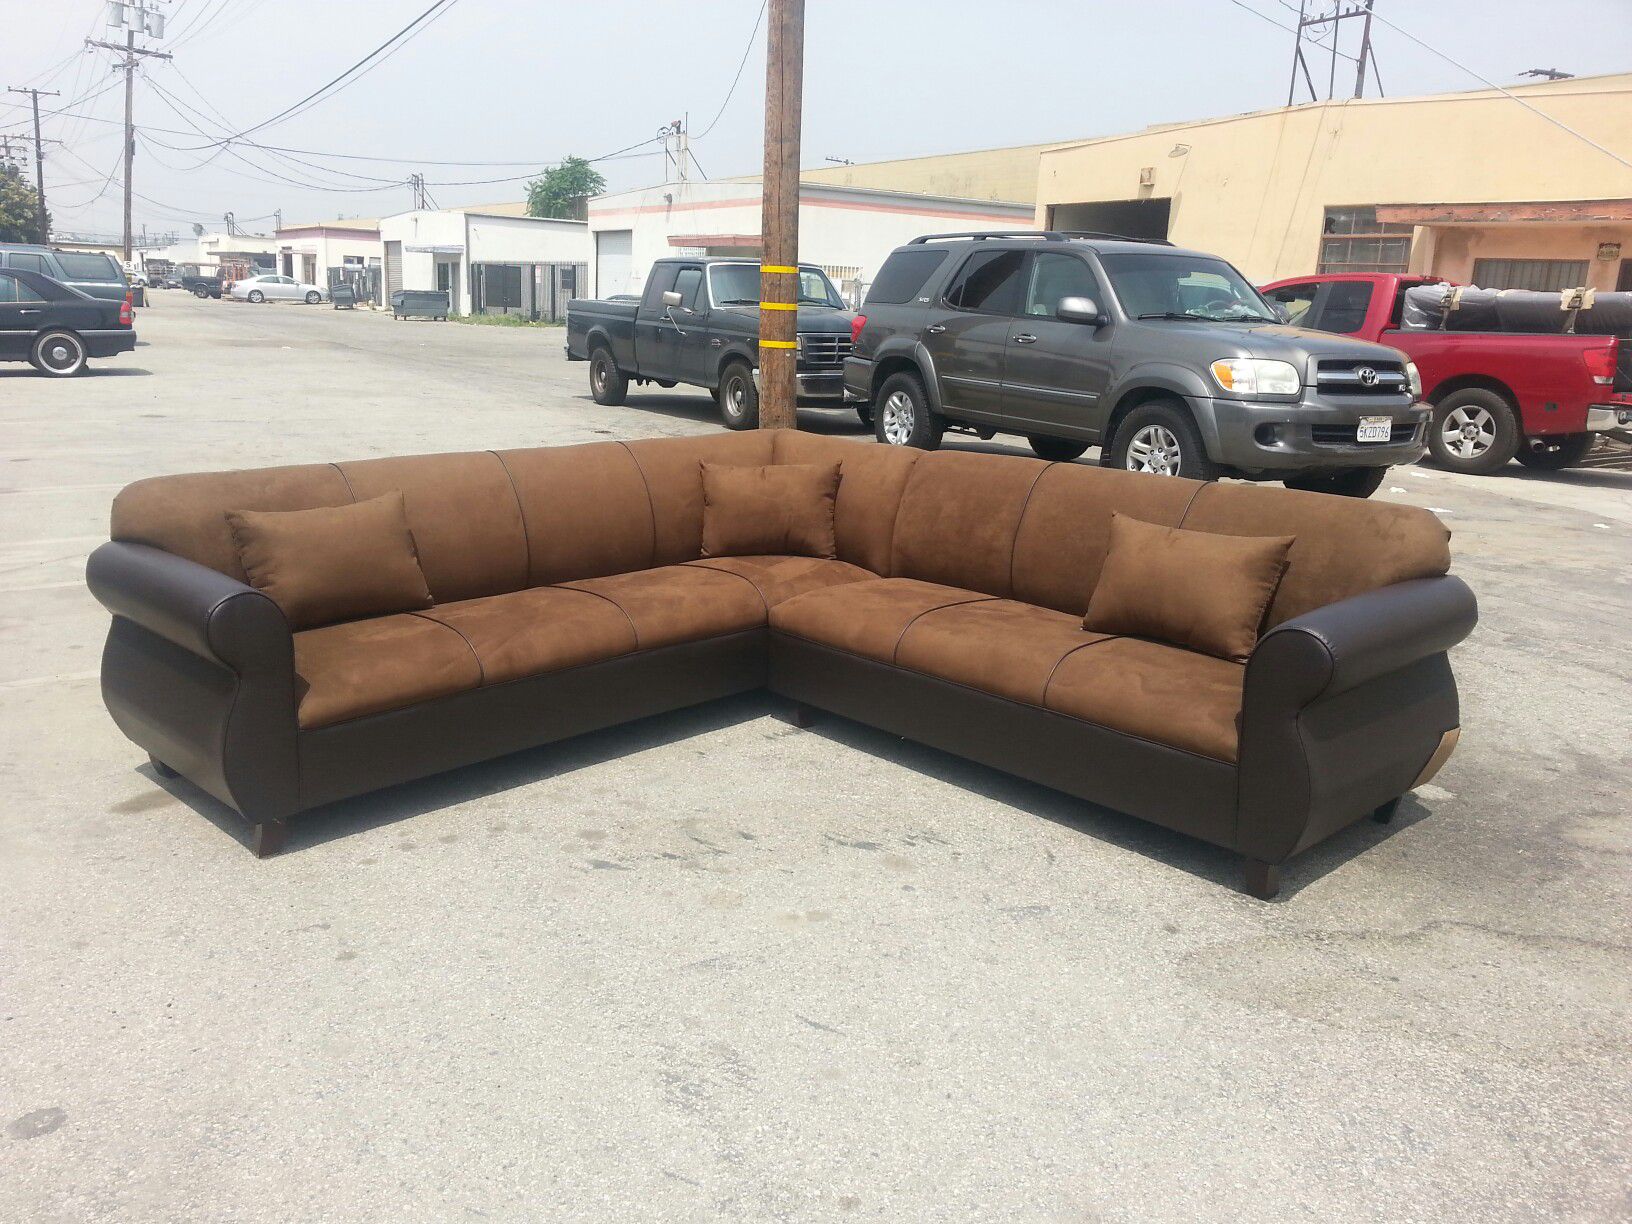 NEW 9X9FT CHOCOLATE MICROFIBER COMBO SECTIONAL COUCHES